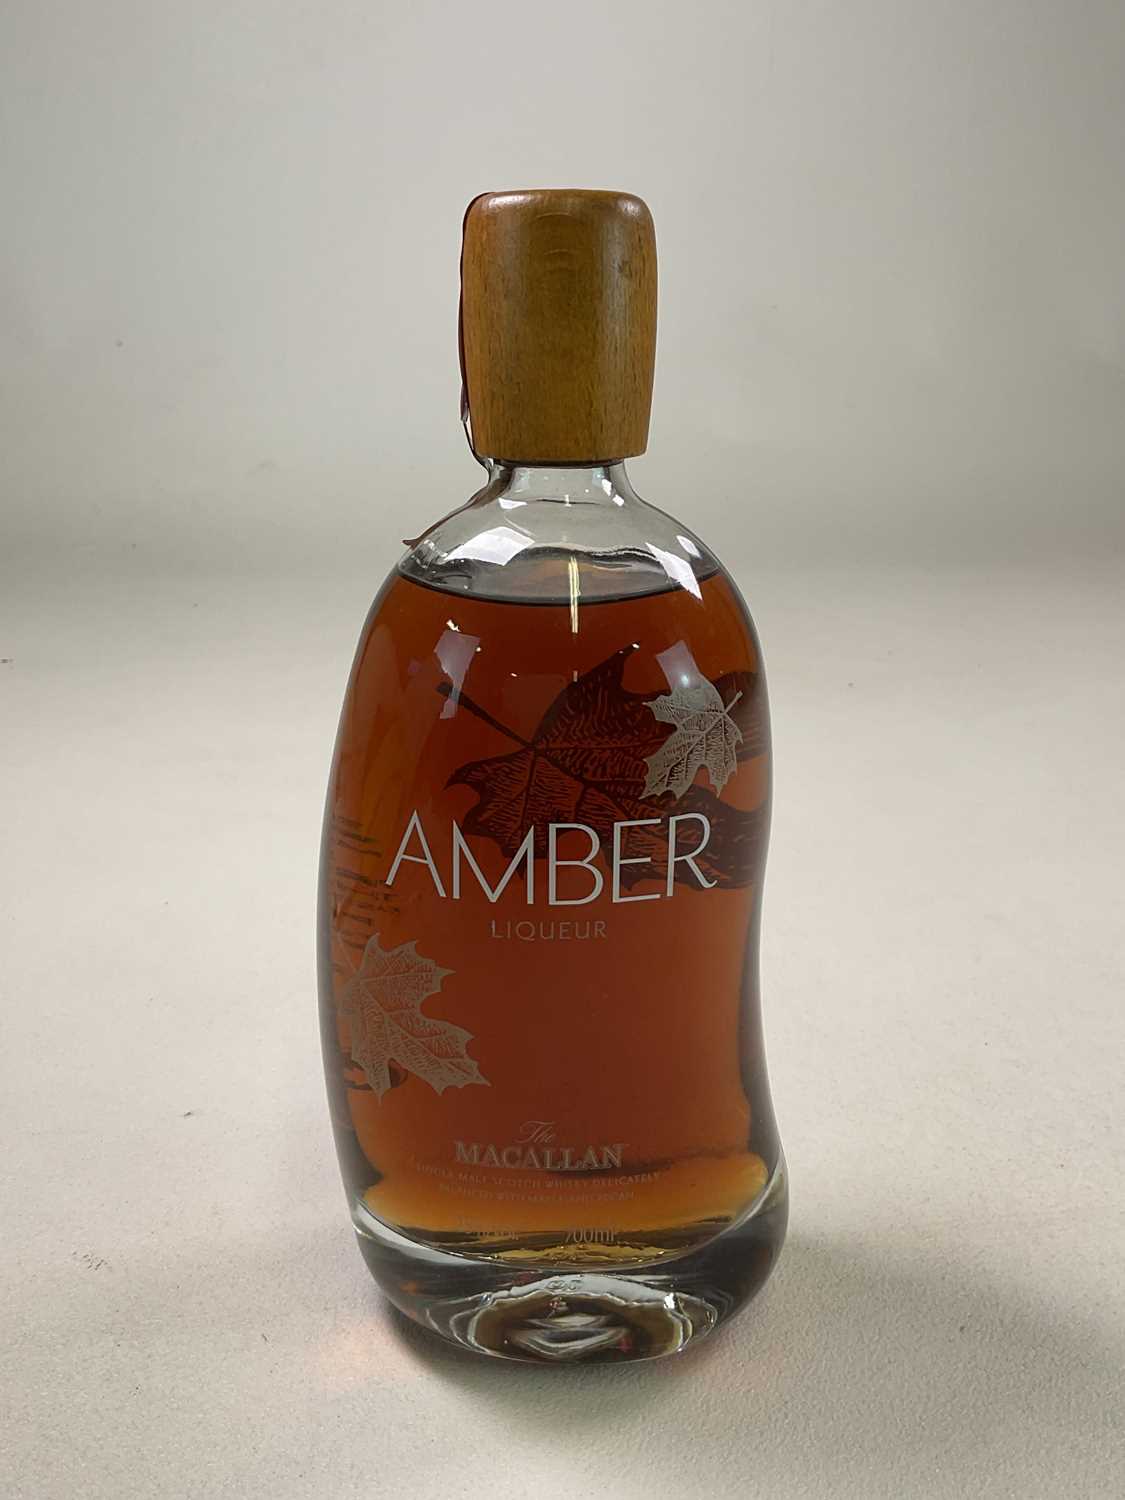 LIQUEUR; a bottle of The Macallan Amber liqueur, Single Malt Scotch whisky balanced with maple and - Image 4 of 4